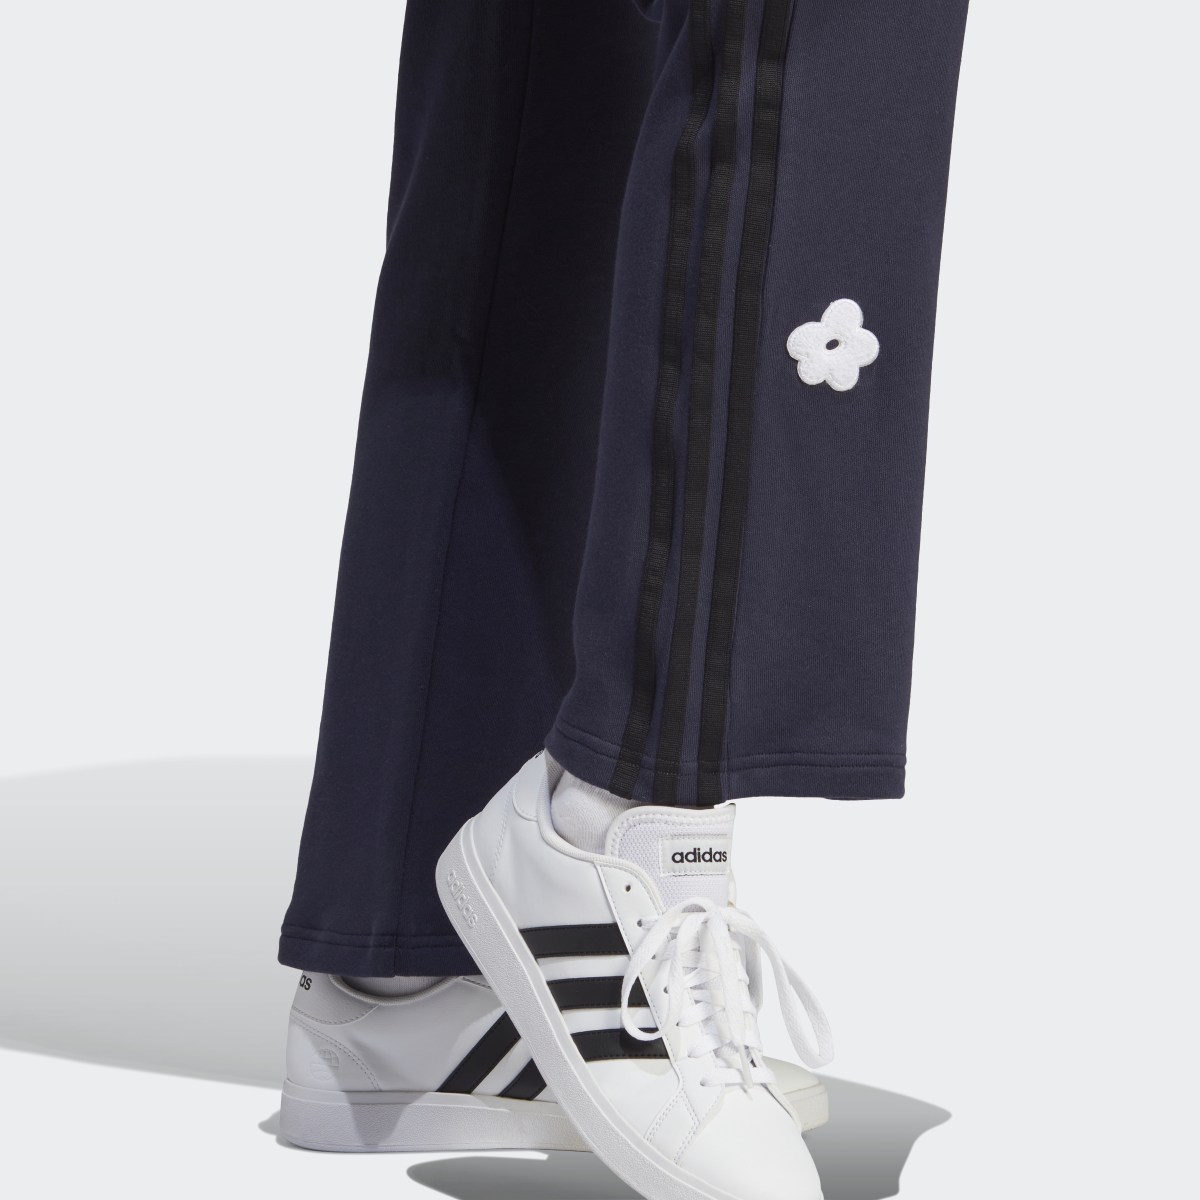 Adidas 3-Stripes High Rise Joggers with Chenille Flower Patches. 6